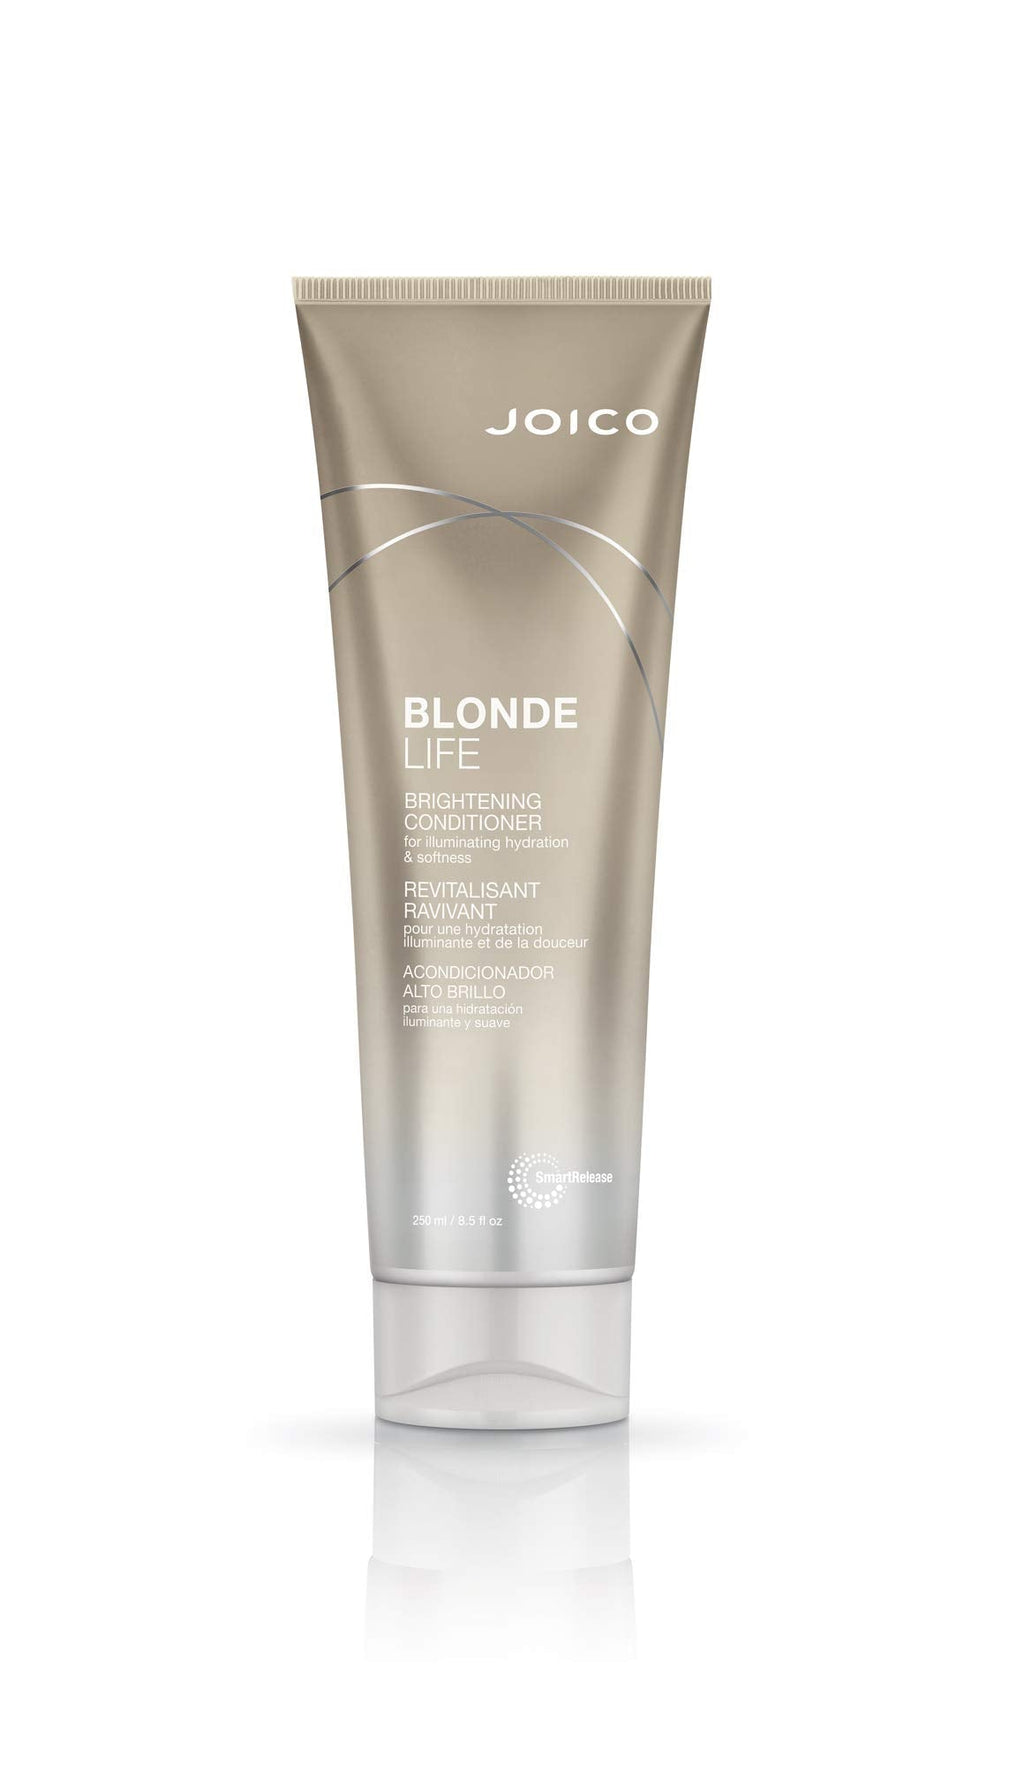 [Australia] - Joico Blonde Life Brightening Conditioner for Unisex, Olive Green, 1 count 